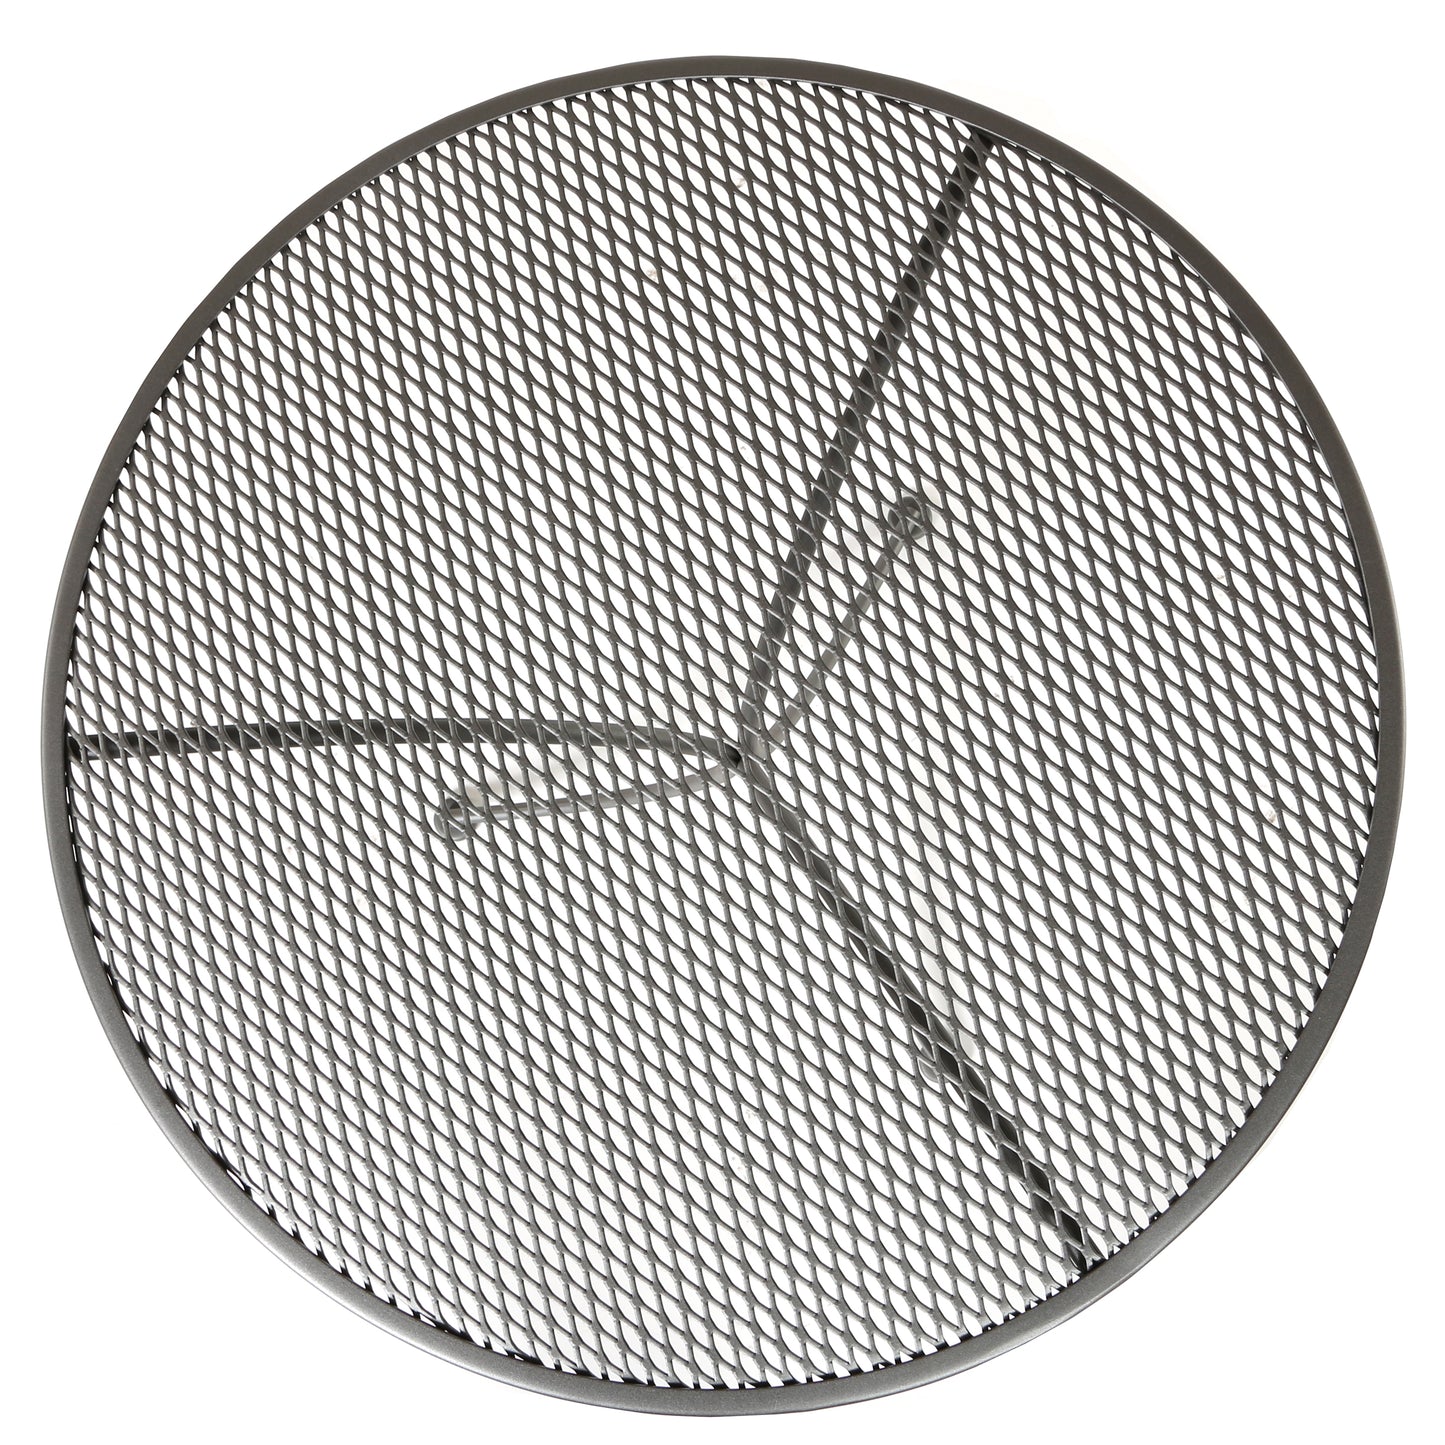 Mesh Top 30" Round Bistro Table